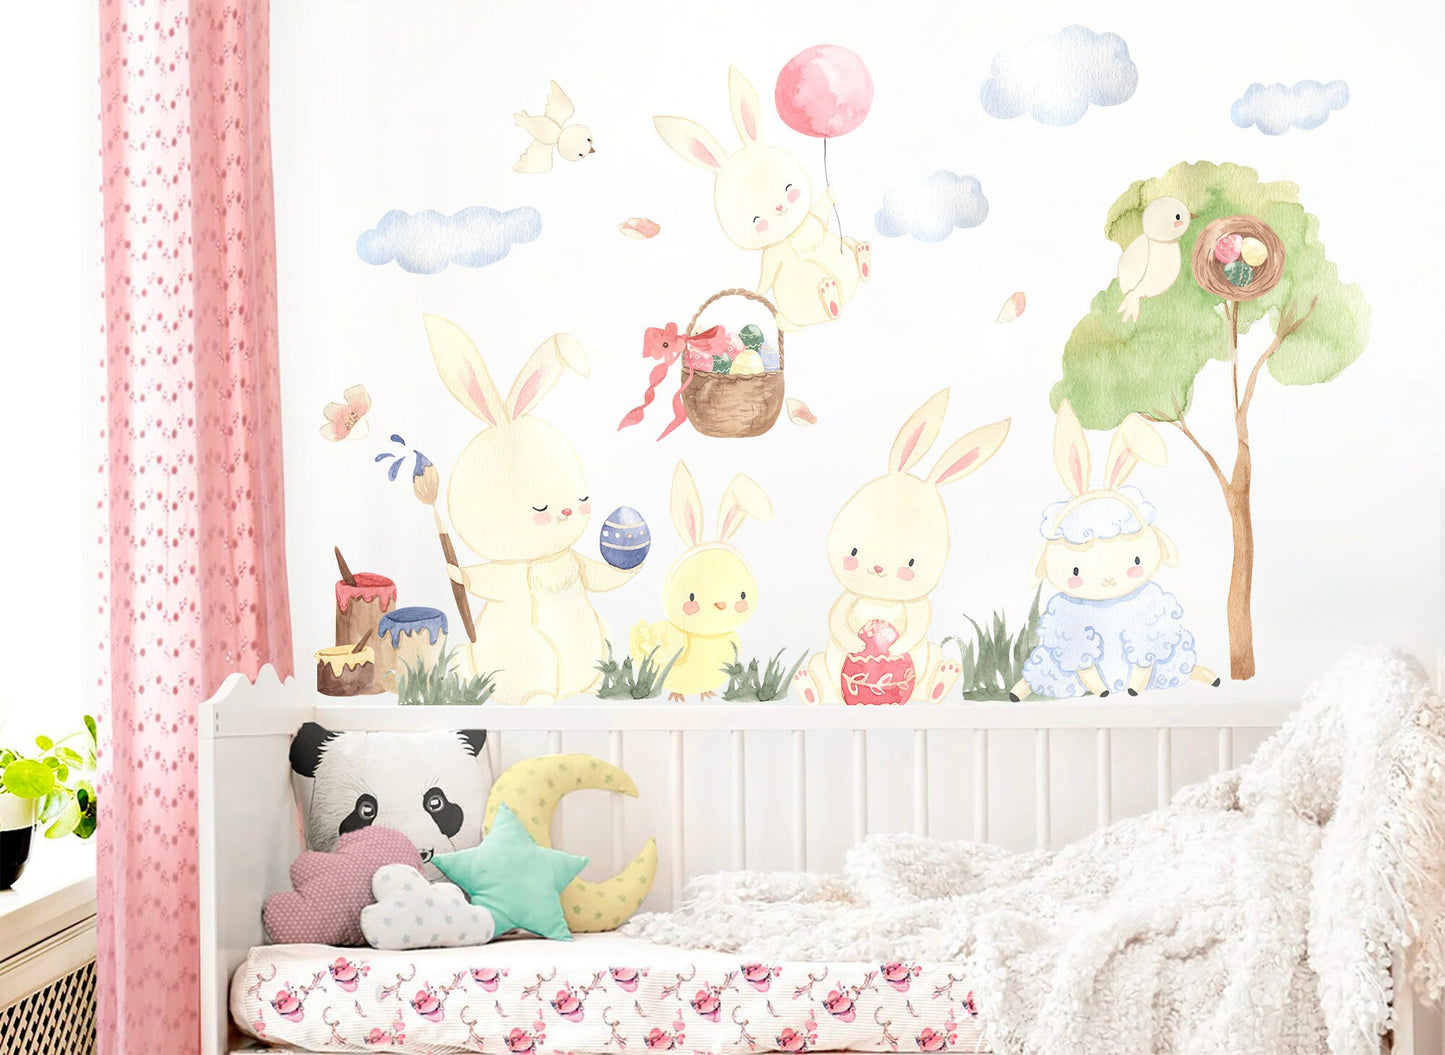 Watercolor Balloon Easter Bunny Celebration Happy Egg Wall Decal - BR140